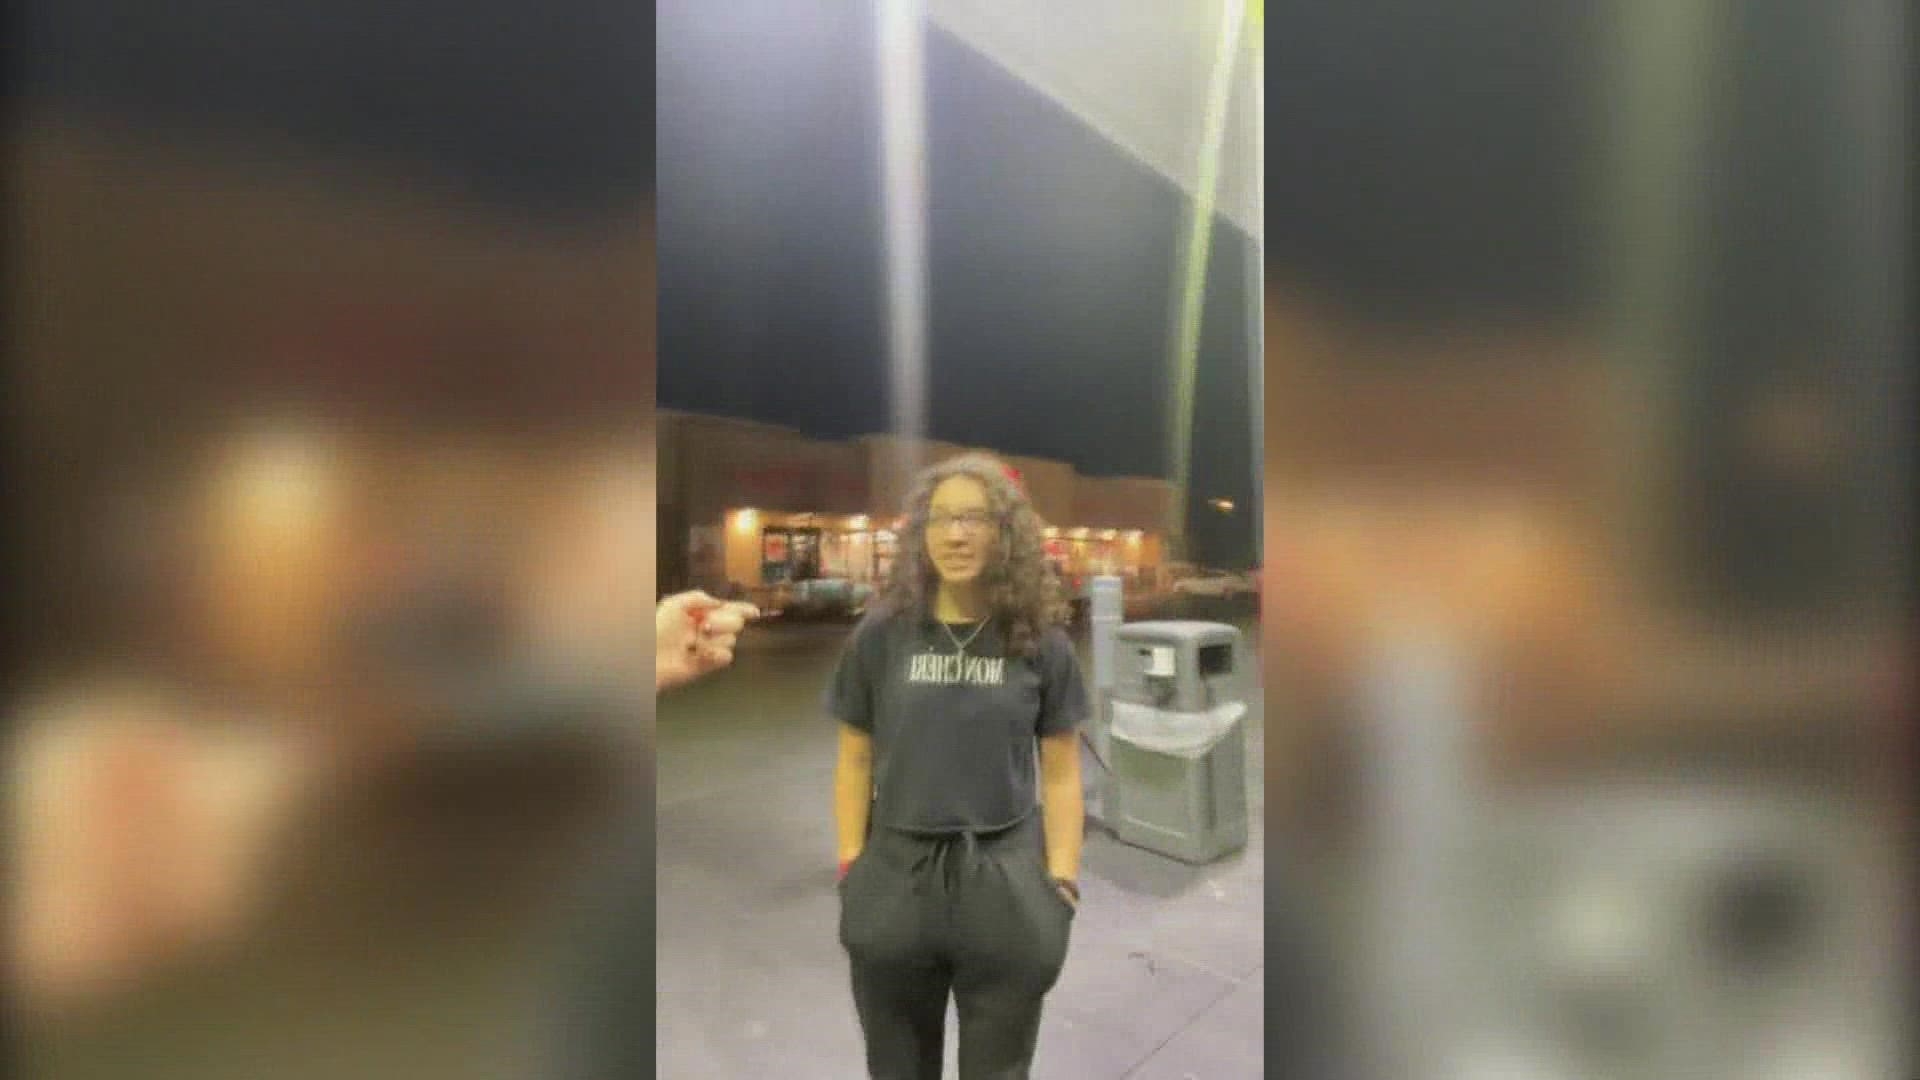 A group of strangers hopped into a van in Florida to get to Knoxville. It was an unexpected adventure for one of the passengers who documented the trip on TikTok